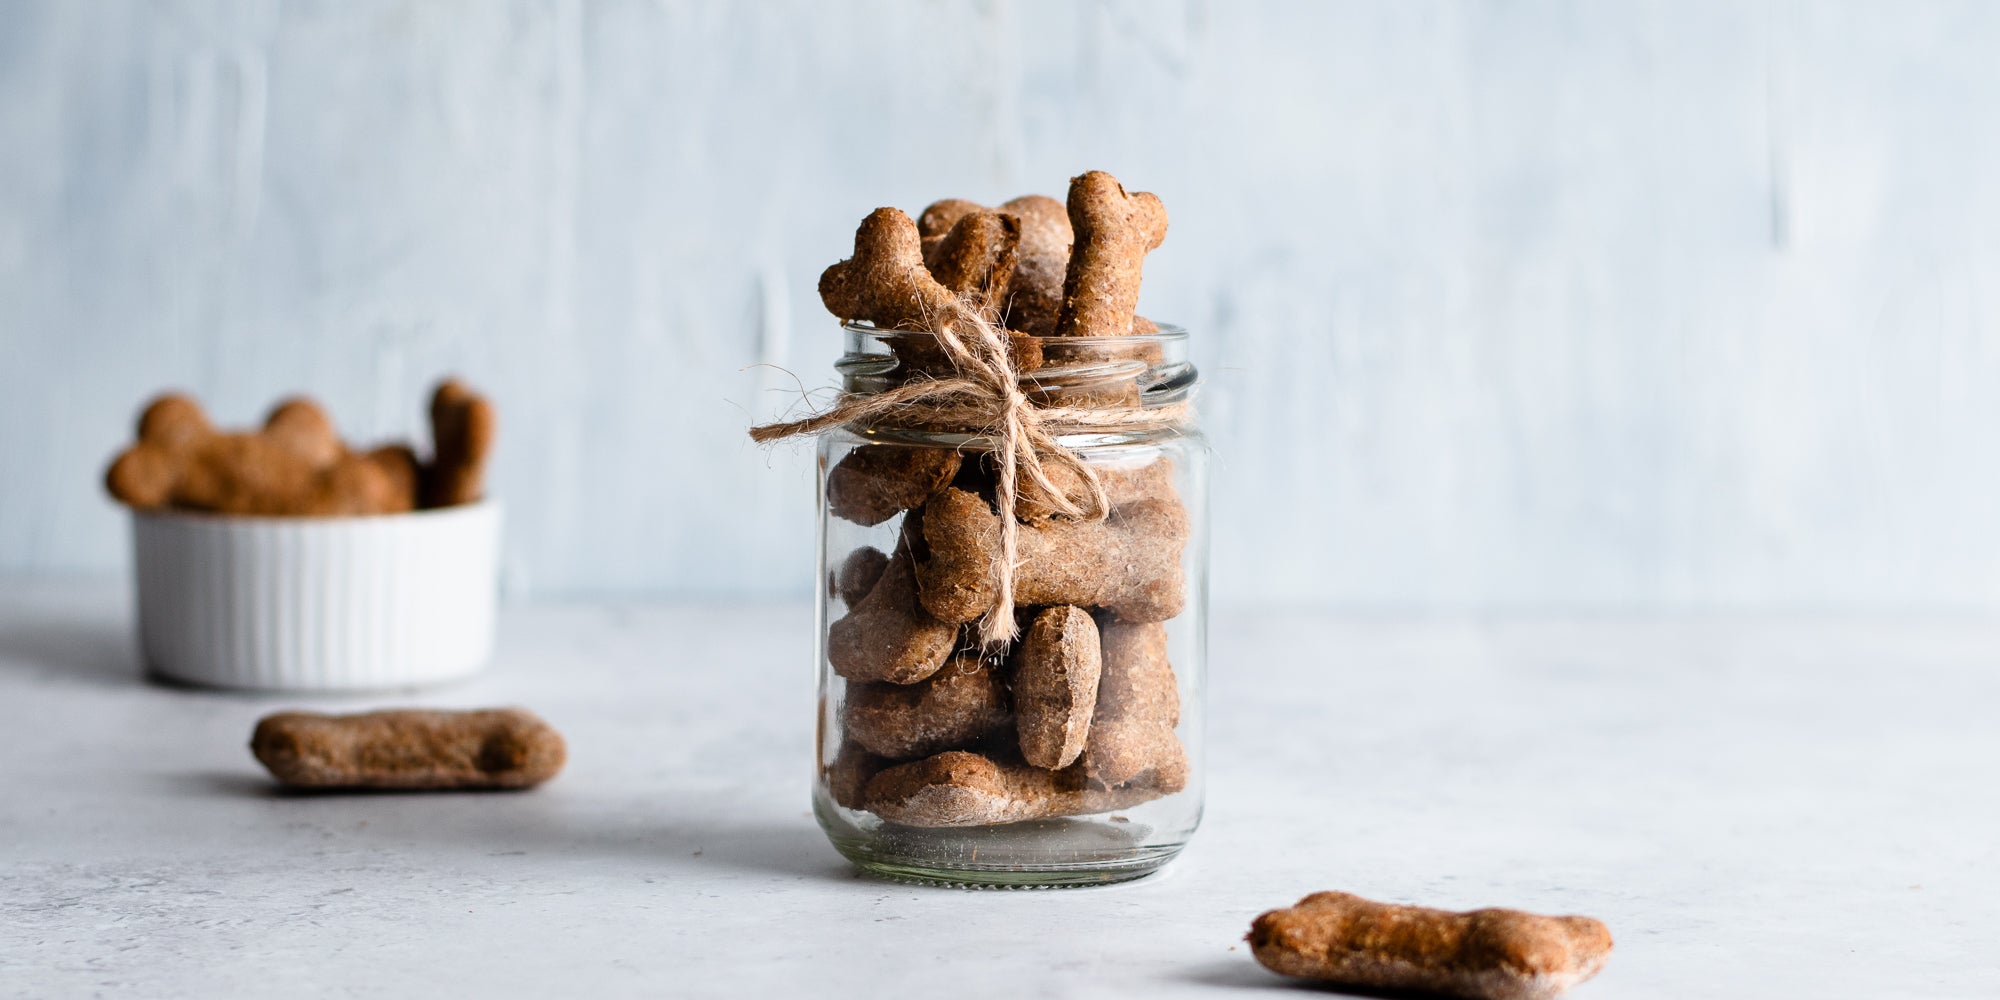 Dog Biscuits in a glass jar tied with twine with a ramekin of dog biscuits in the background